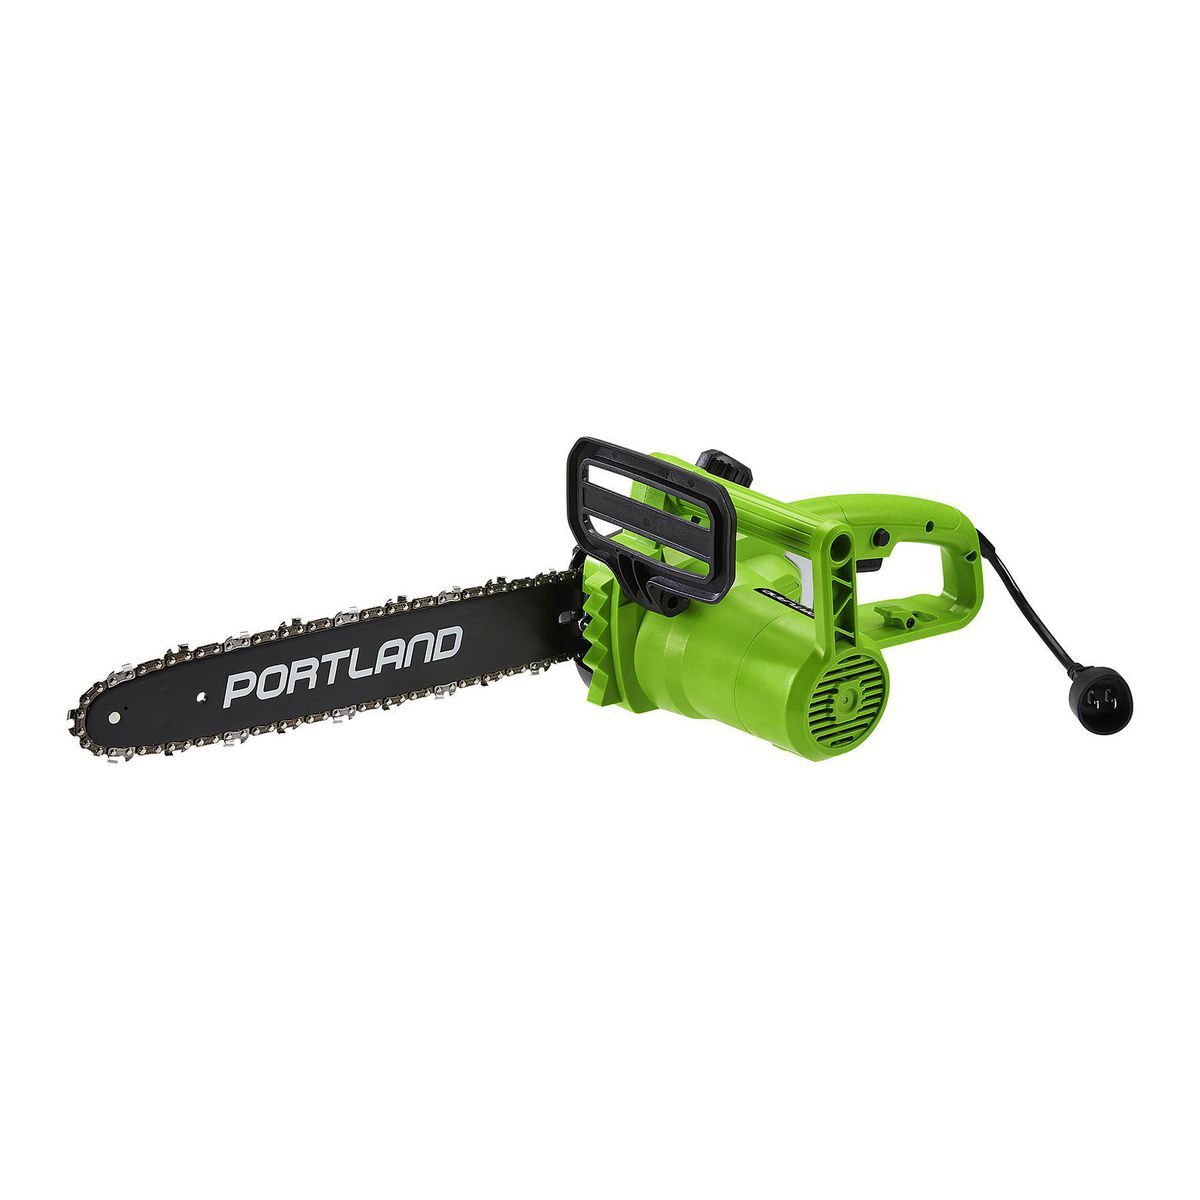 PORTLAND 9 Amp 14 in. Electric Chainsaw